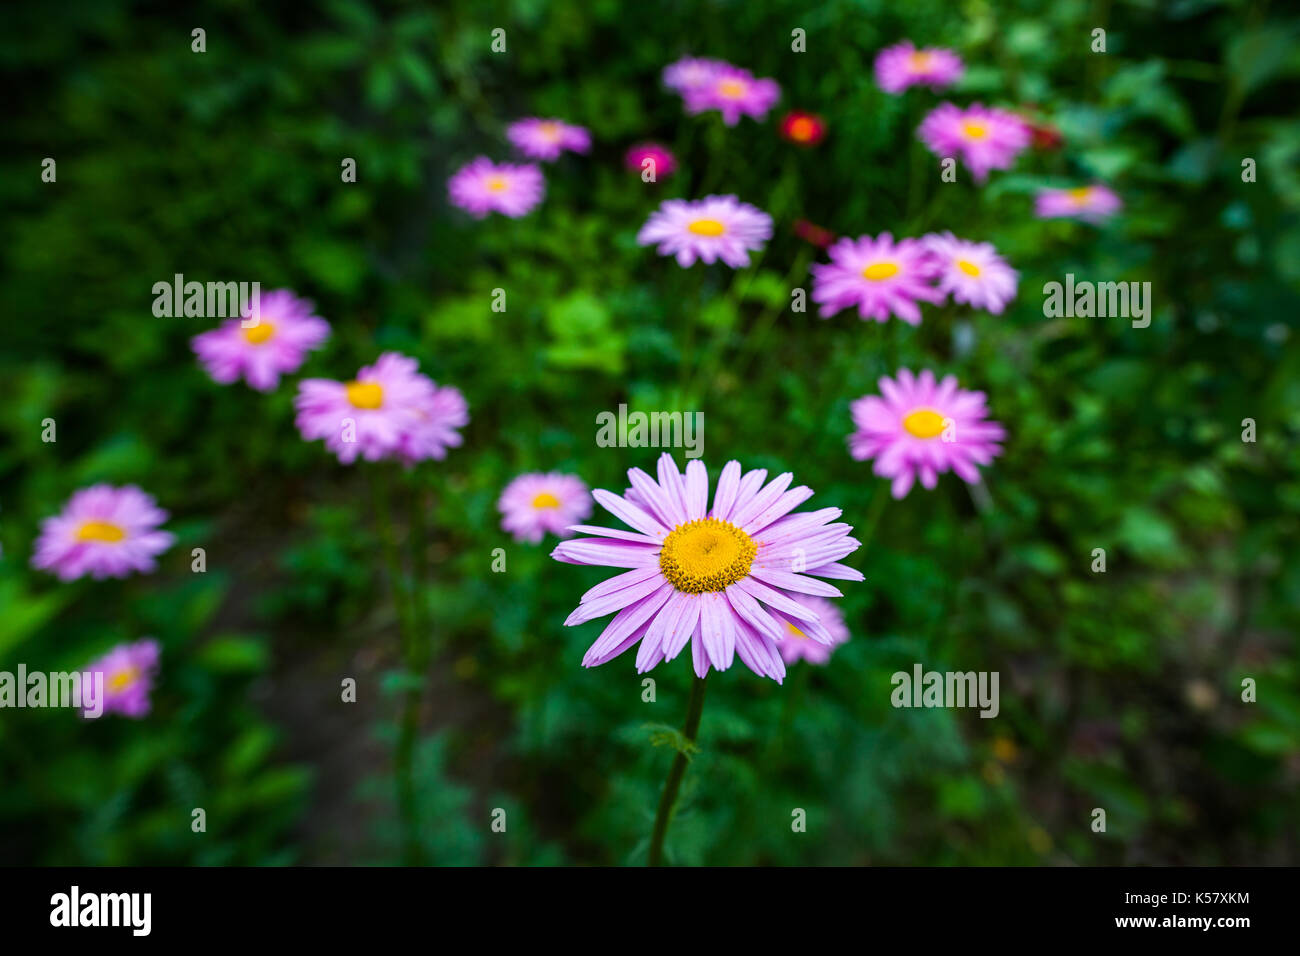 Pink flowers of painted daisy growing in the garden. Stock Photo